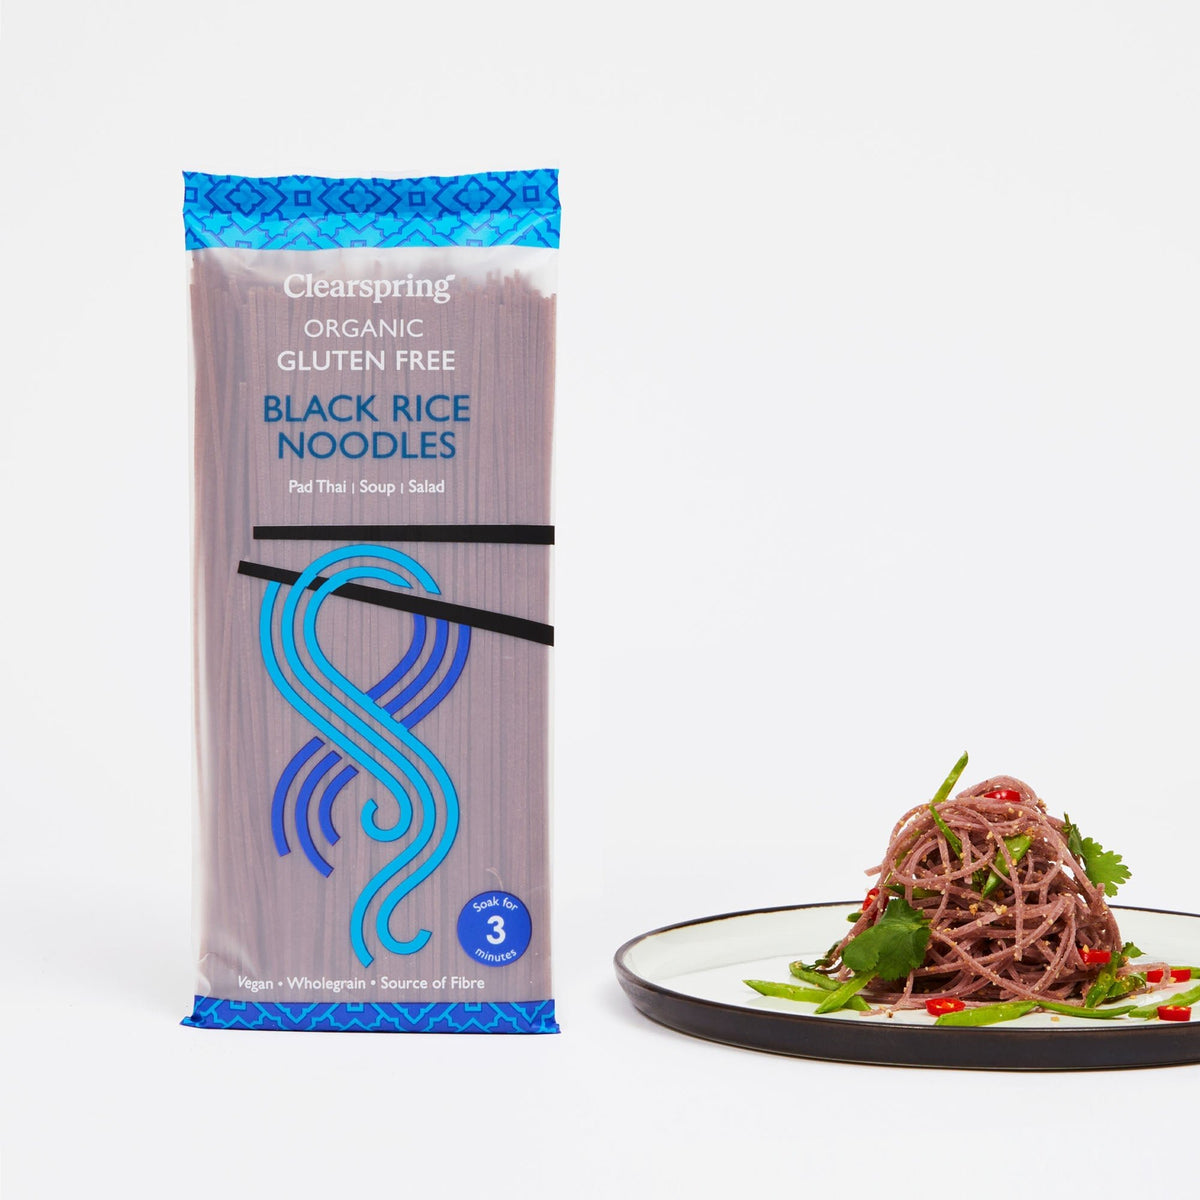 Clearspring Organic Gluten Free Black Rice Noodles (10 Pack)